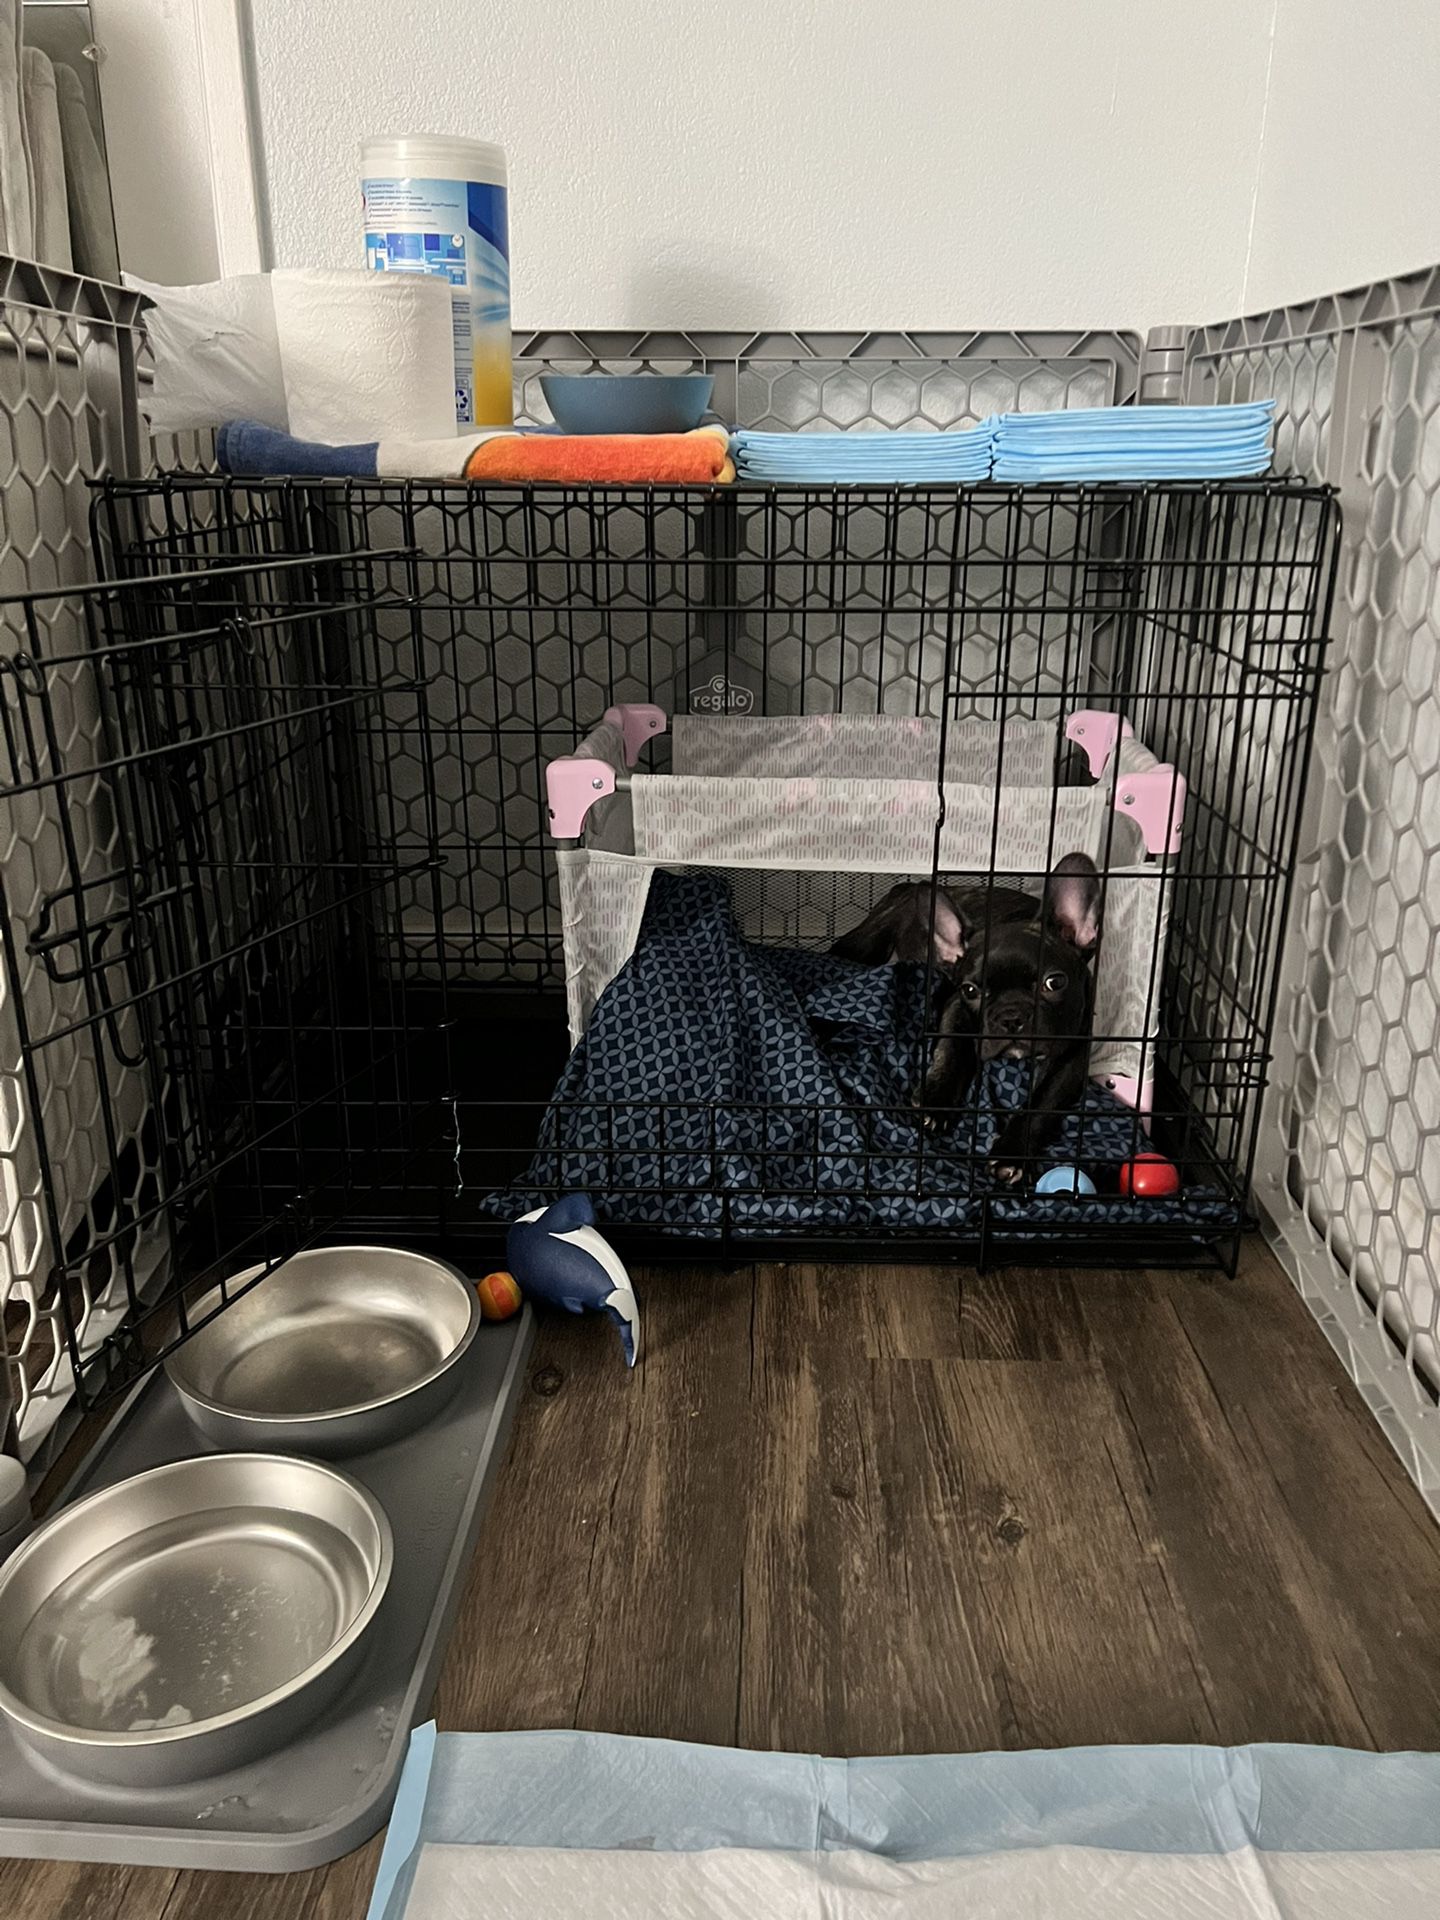 Puppy Fence / Crate